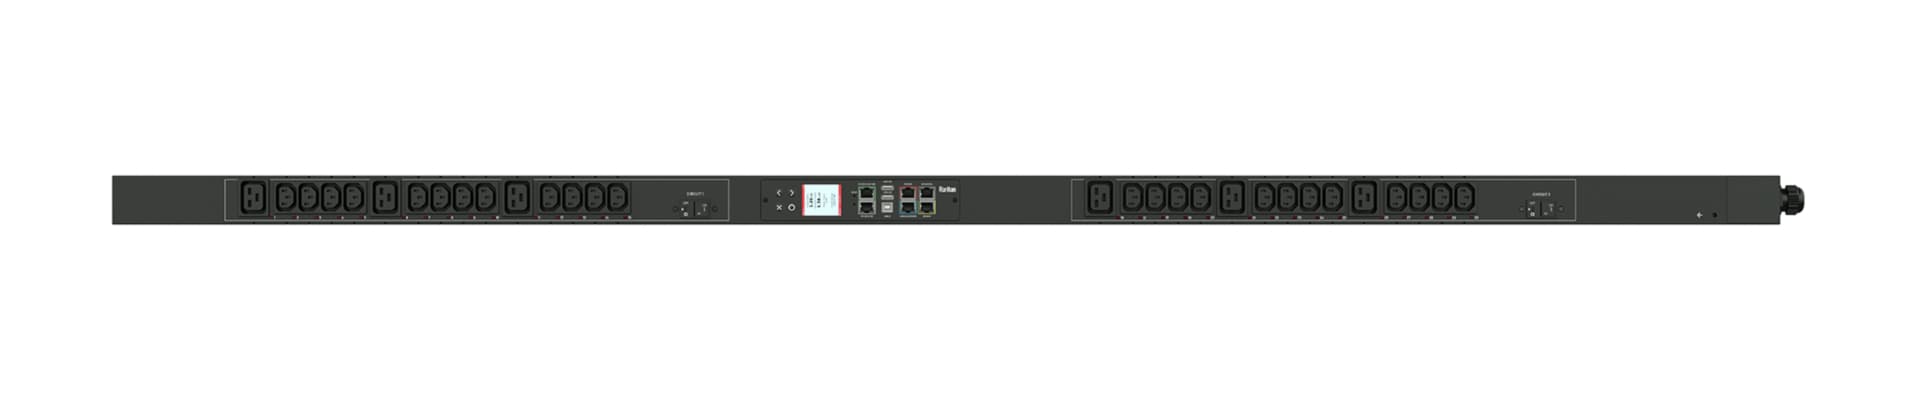 Raritan Single Phase Rack Power Distribution Unit with 24xC13 and 6xC19 Receptacles